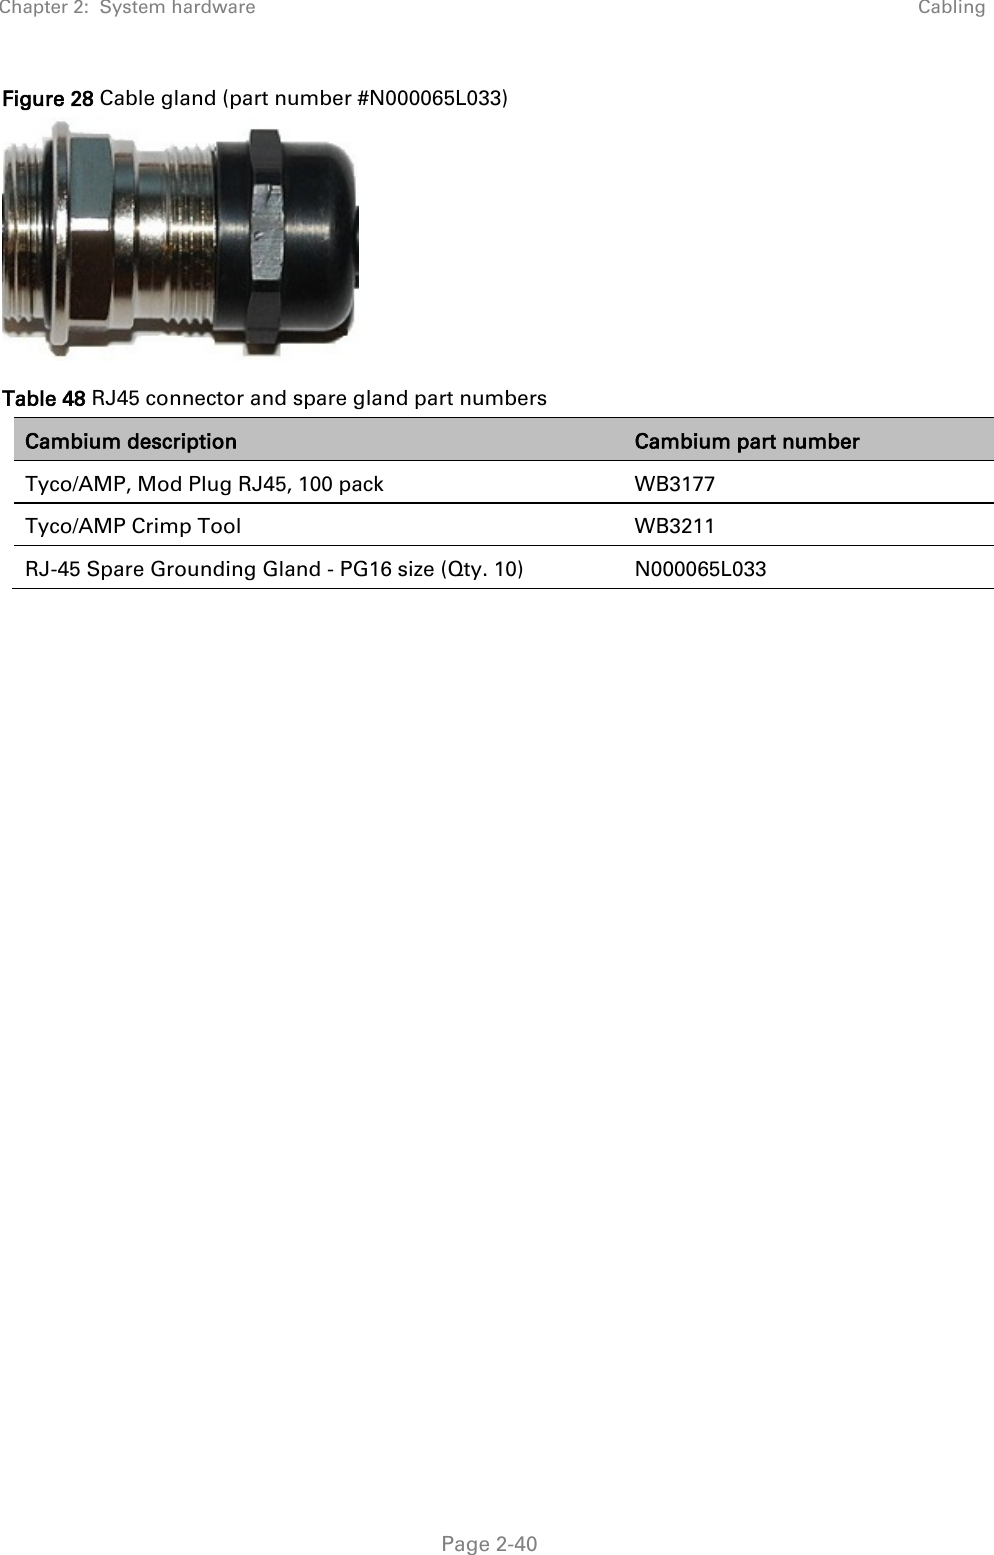 Chapter 2:  System hardware Cabling   Page 2-40 Figure 28 Cable gland (part number #N000065L033)  Table 48 RJ45 connector and spare gland part numbers Cambium description Cambium part number Tyco/AMP, Mod Plug RJ45, 100 pack WB3177 Tyco/AMP Crimp Tool WB3211 RJ-45 Spare Grounding Gland - PG16 size (Qty. 10) N000065L033    